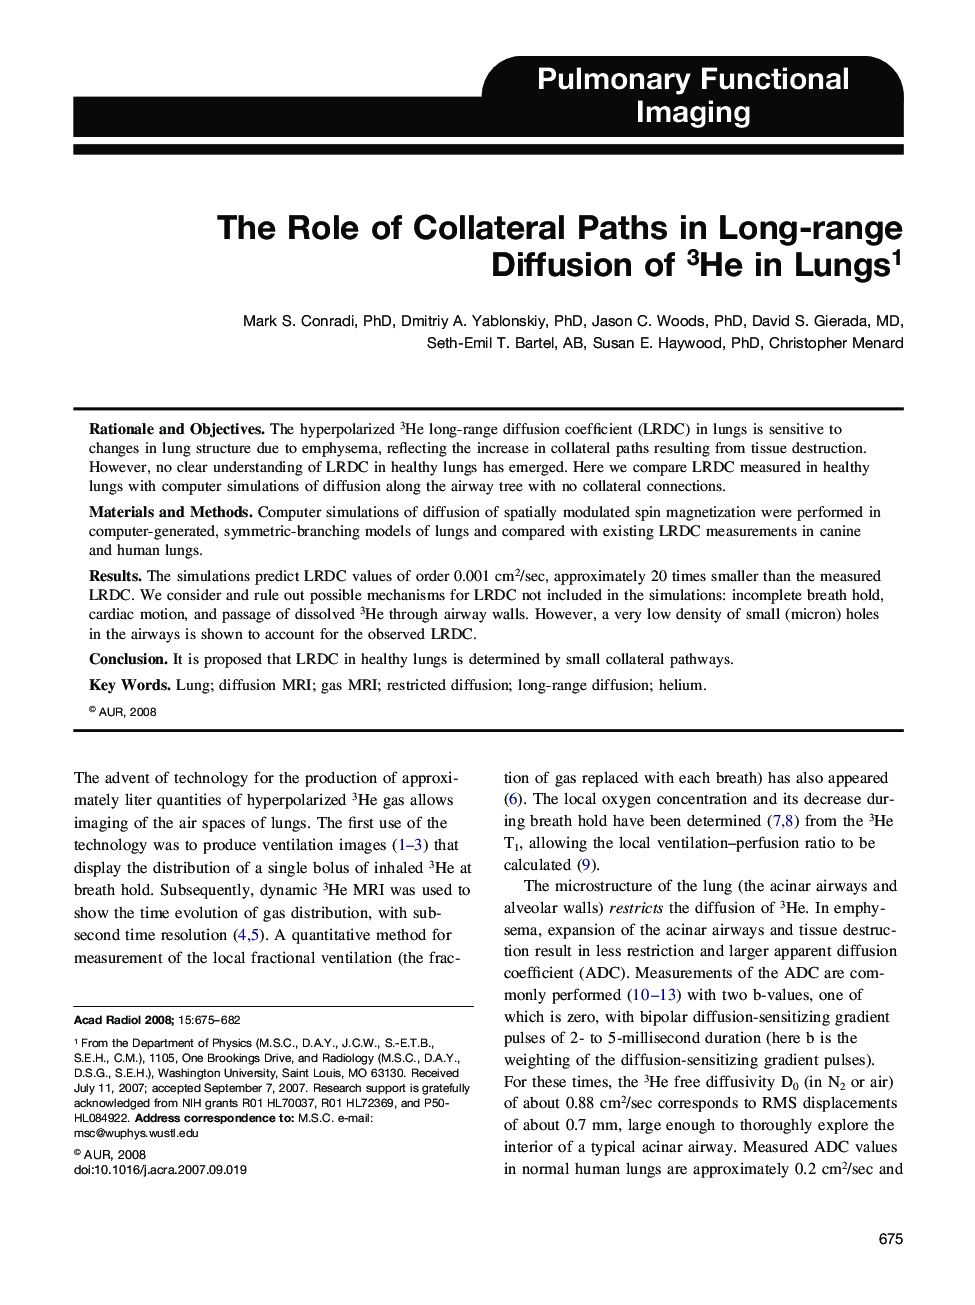 The Role of Collateral Paths in Long-range Diffusion of 3He in Lungs